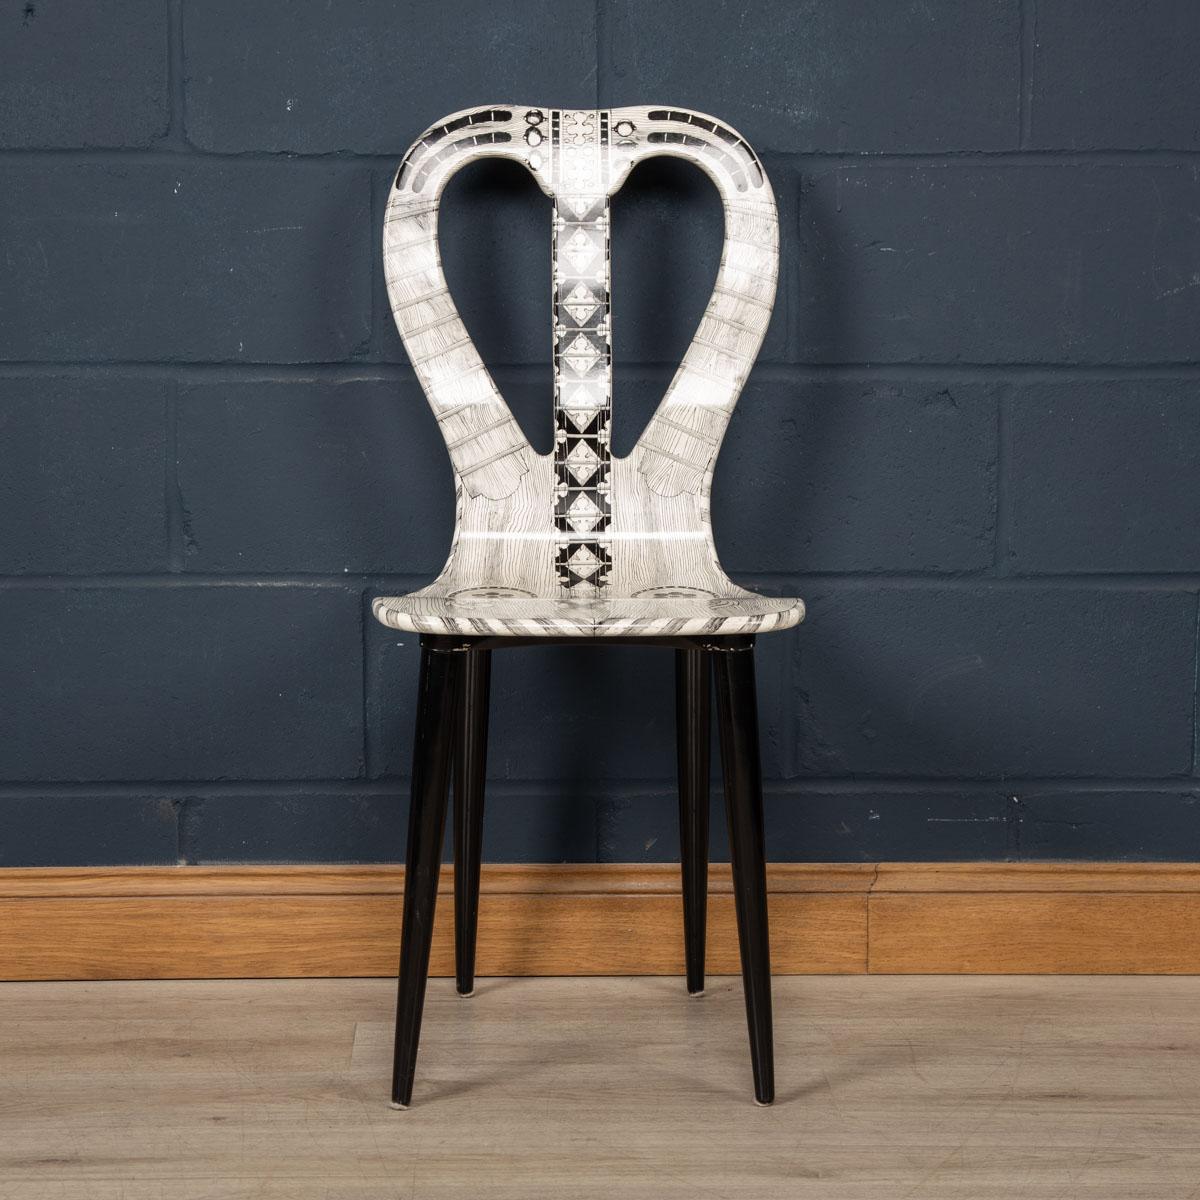 A very rare chair by Fornasetti Studios made in Italy towards the latter end of the 20th century. These chairs are handcrafted using the original artisan techniques. It is silk-screened by hand, hand painted and covered with a smooth lacquer. This